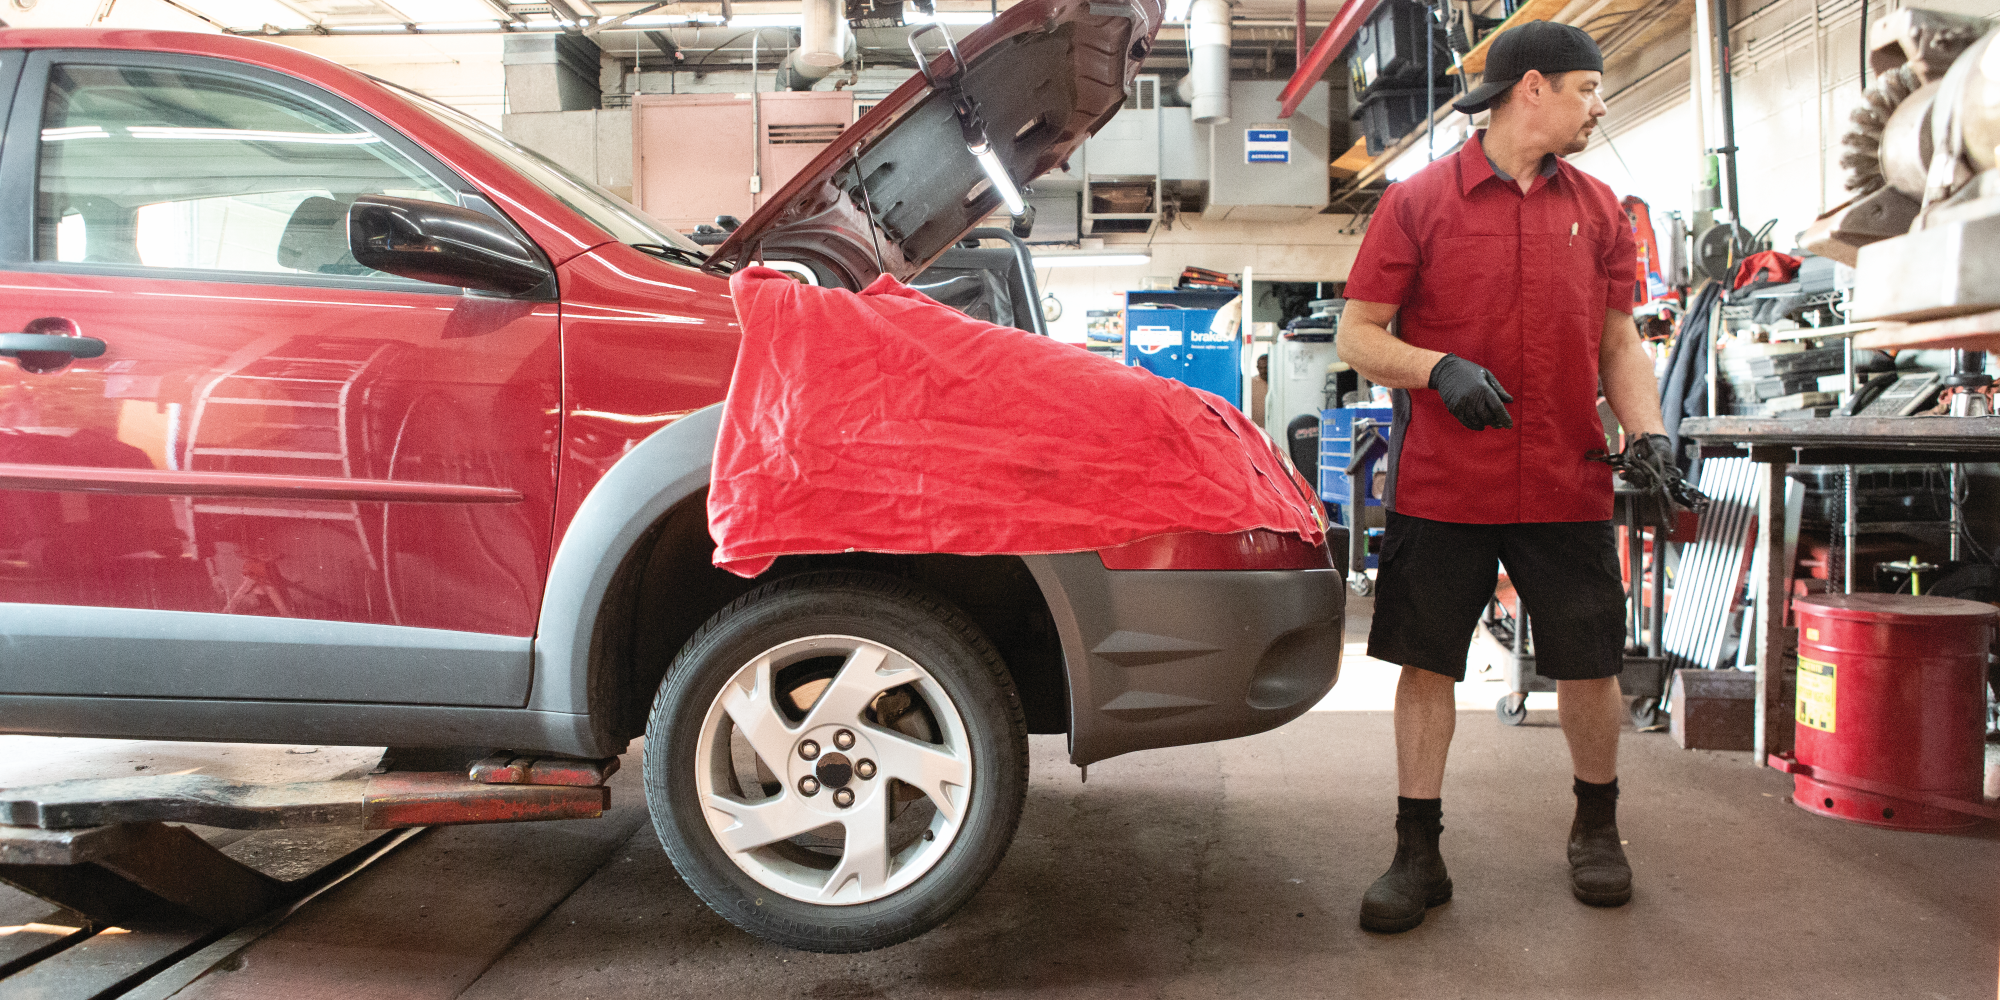 Uniformed mechanic working on a car with a fender cover